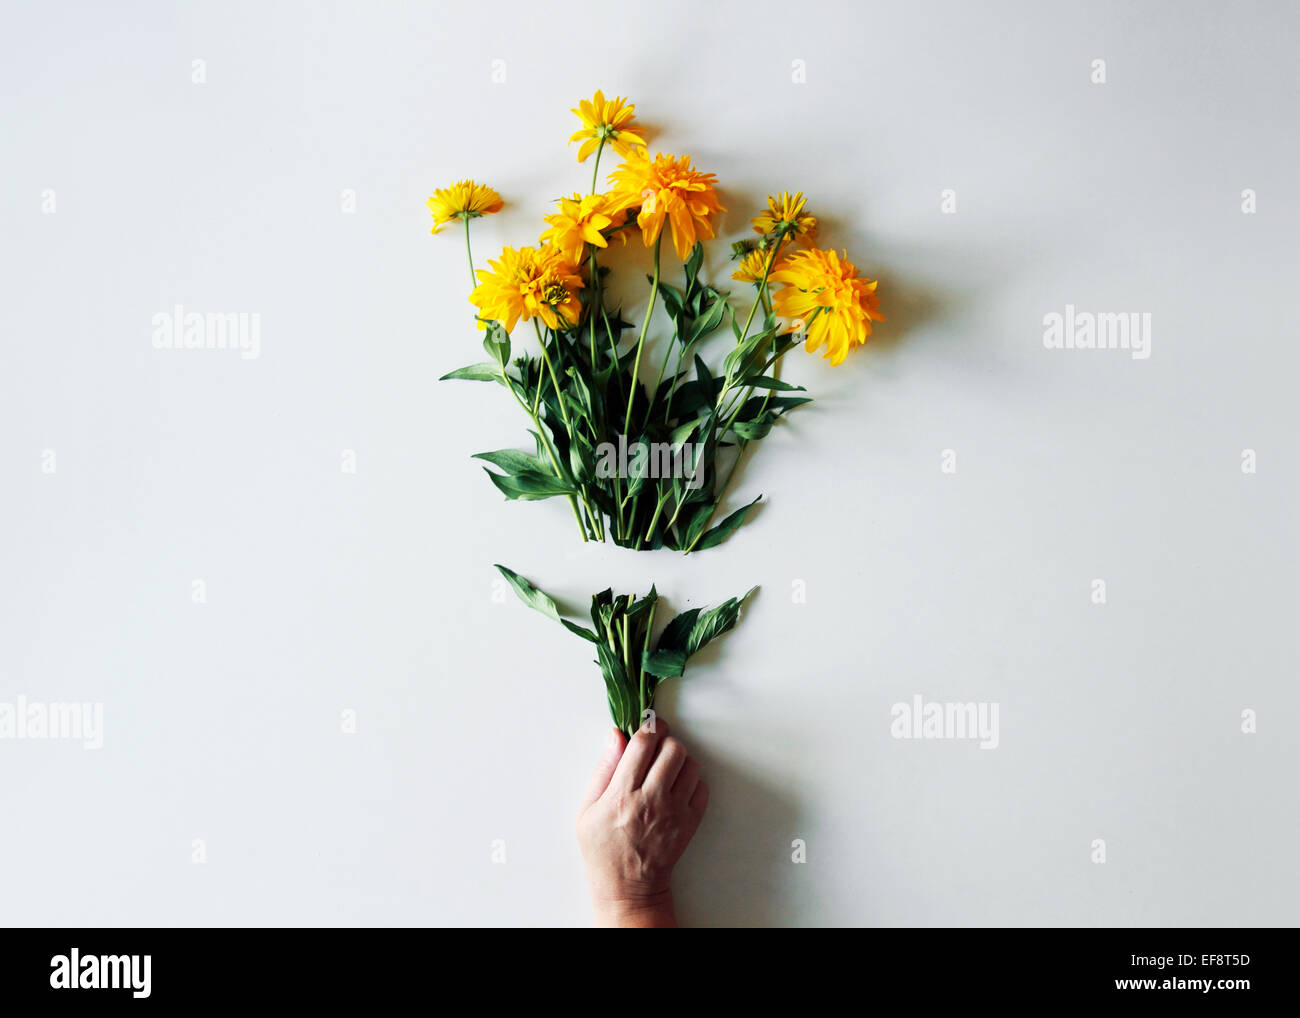 Human hand holding a broken bunch of flowers Stock Photo